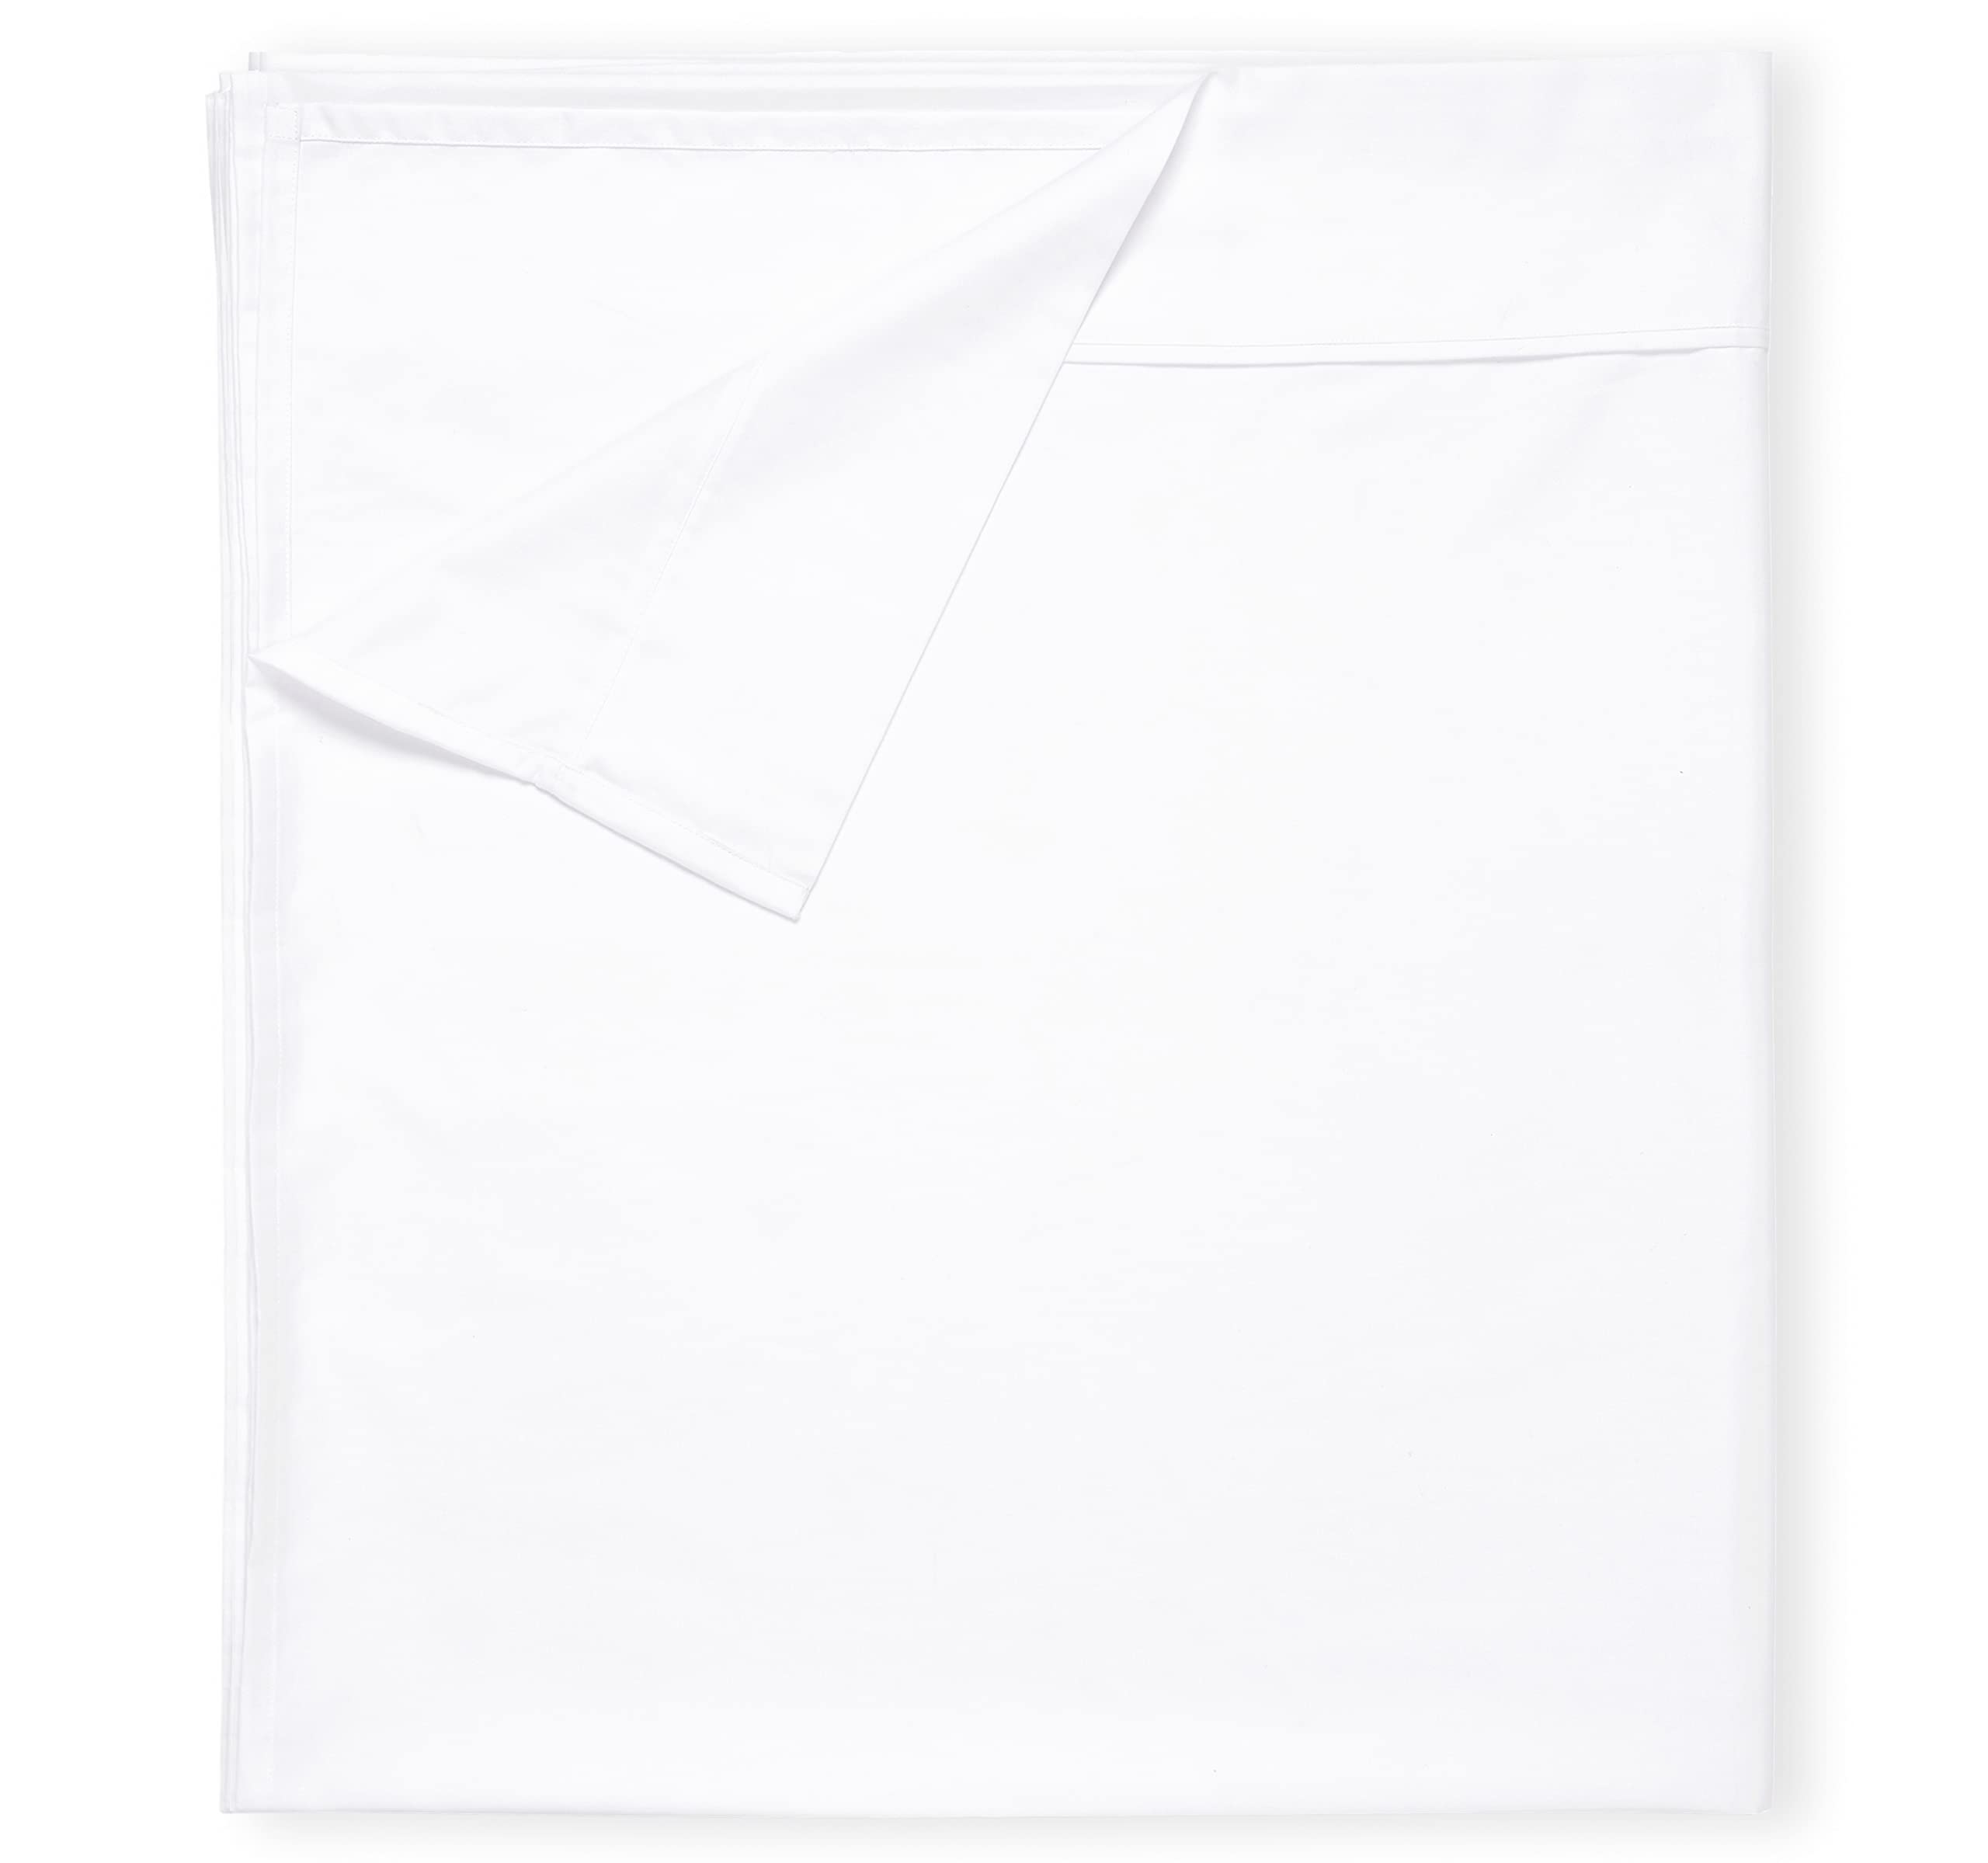 Book Cover Queen Size Flat Sheet, Soft 100% Cotton Sheet, 400 Thread Count Sateen, Cooling & Breathable Bed Sheets, White Flat Sheet, Queen Sheets, Top Sheets, Single Queen Flat Sheet Only (Bright White) Queen Flat Sheet only Bright White